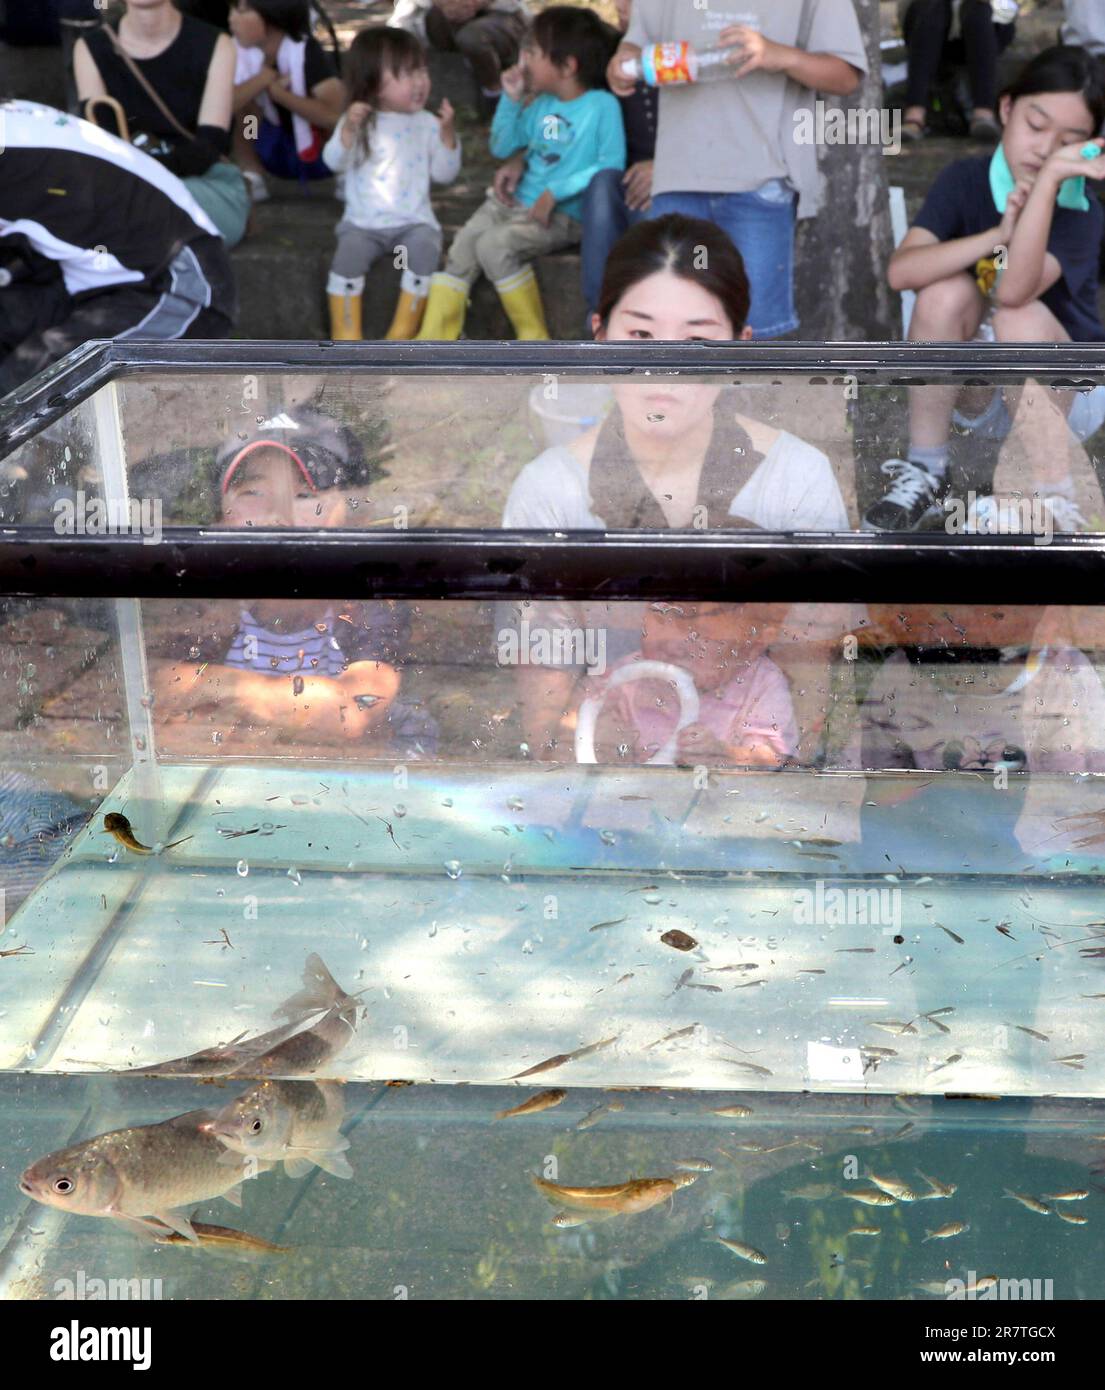 Fish caught in a net is shown in a water tank during the Sakana